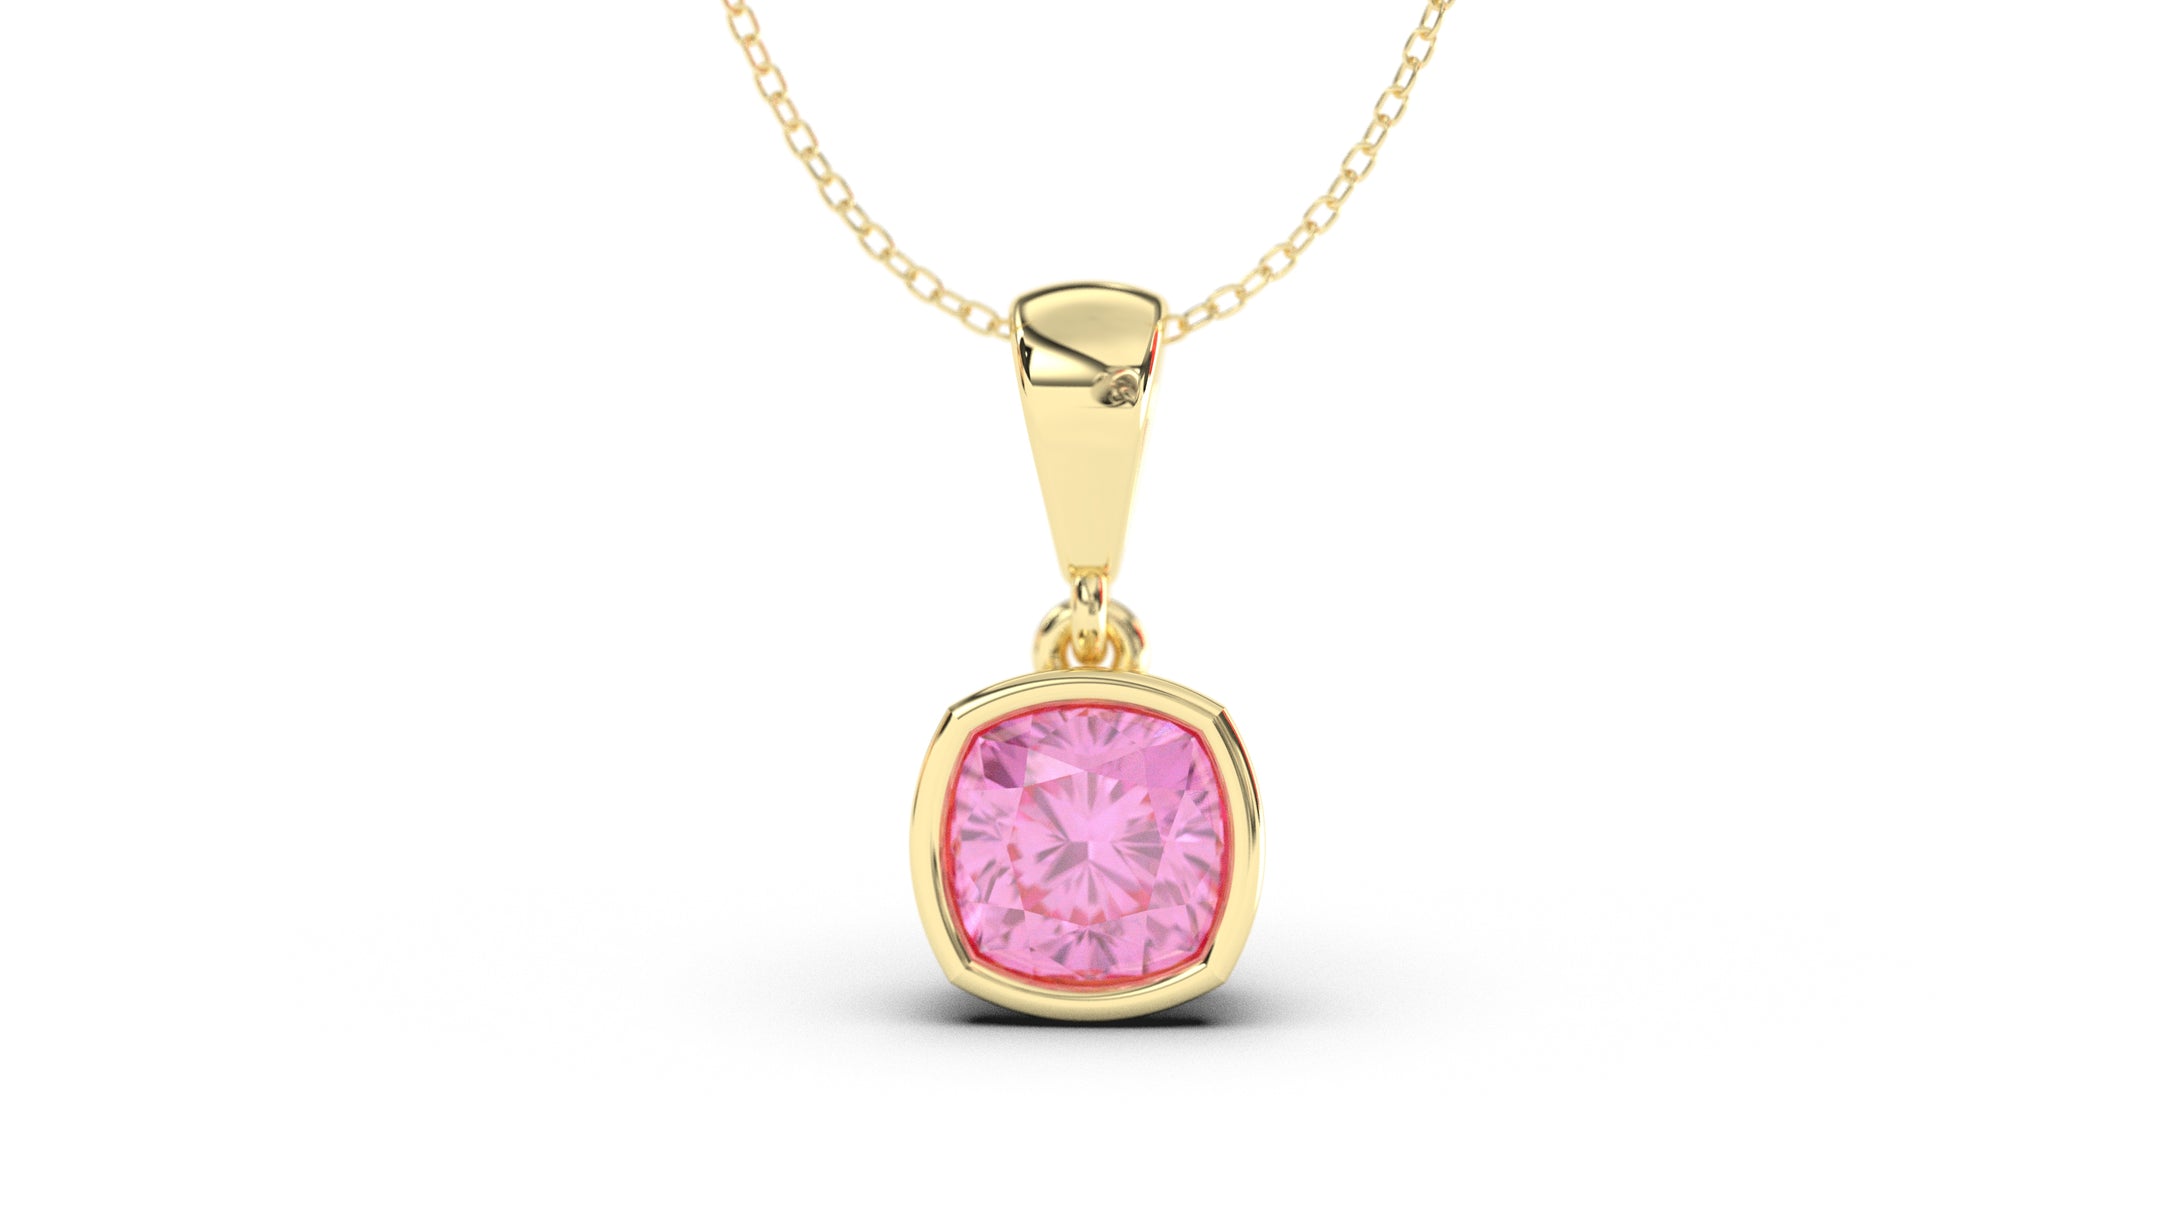 Vintage Style Pendant with Cushion Cut Pink Sapphire set in Bezel Setting | Heritage Retro VII